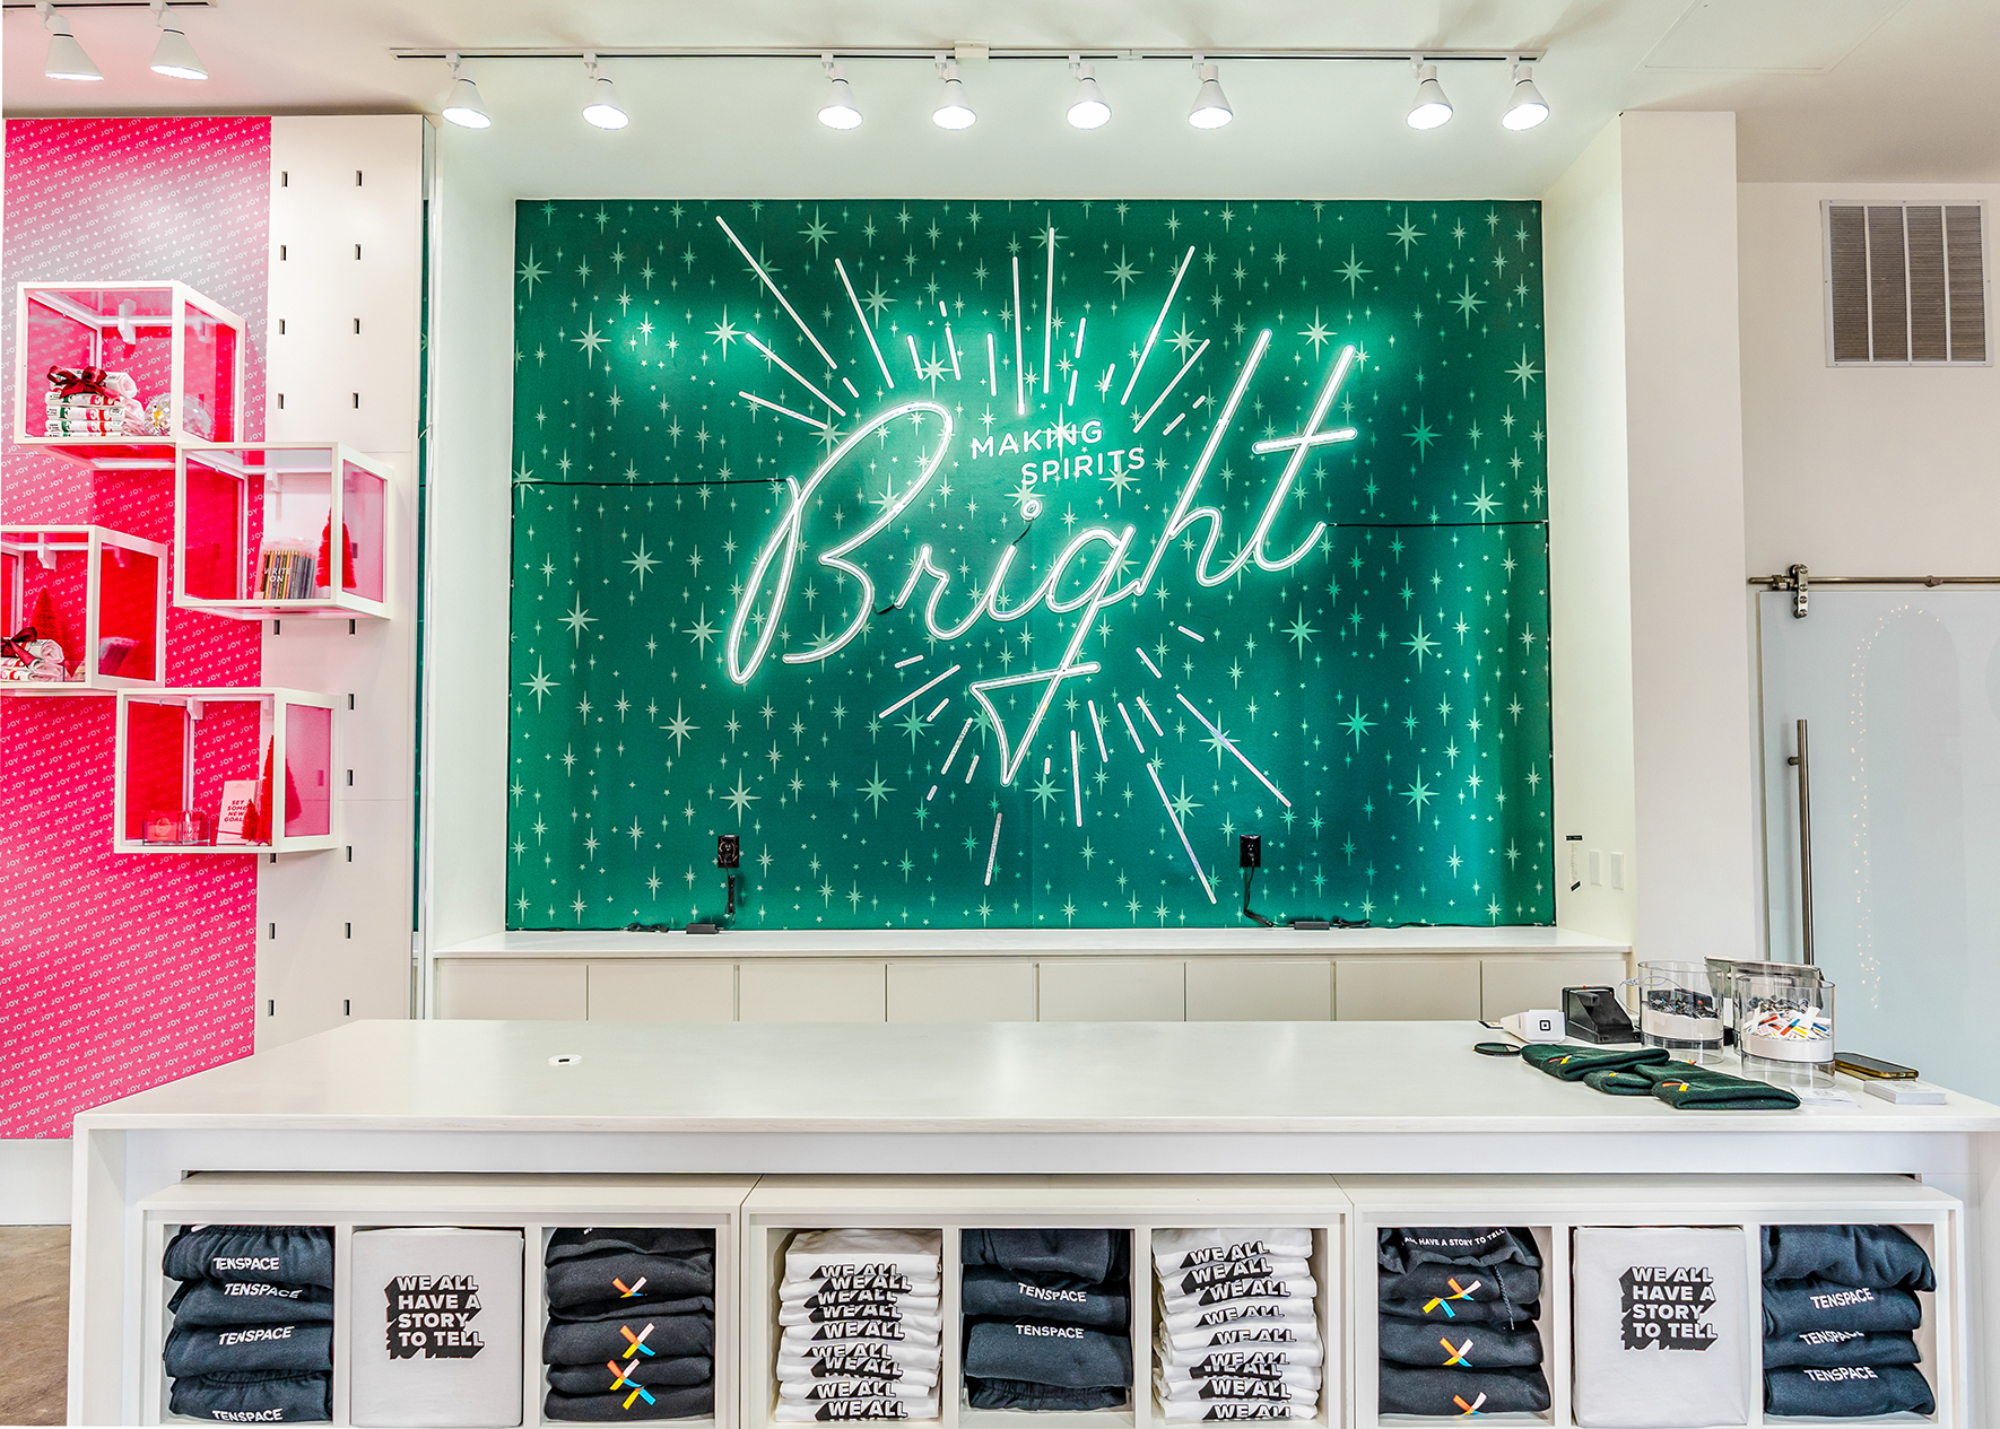 3 Trends That Will Positively Impact Retail in 2022